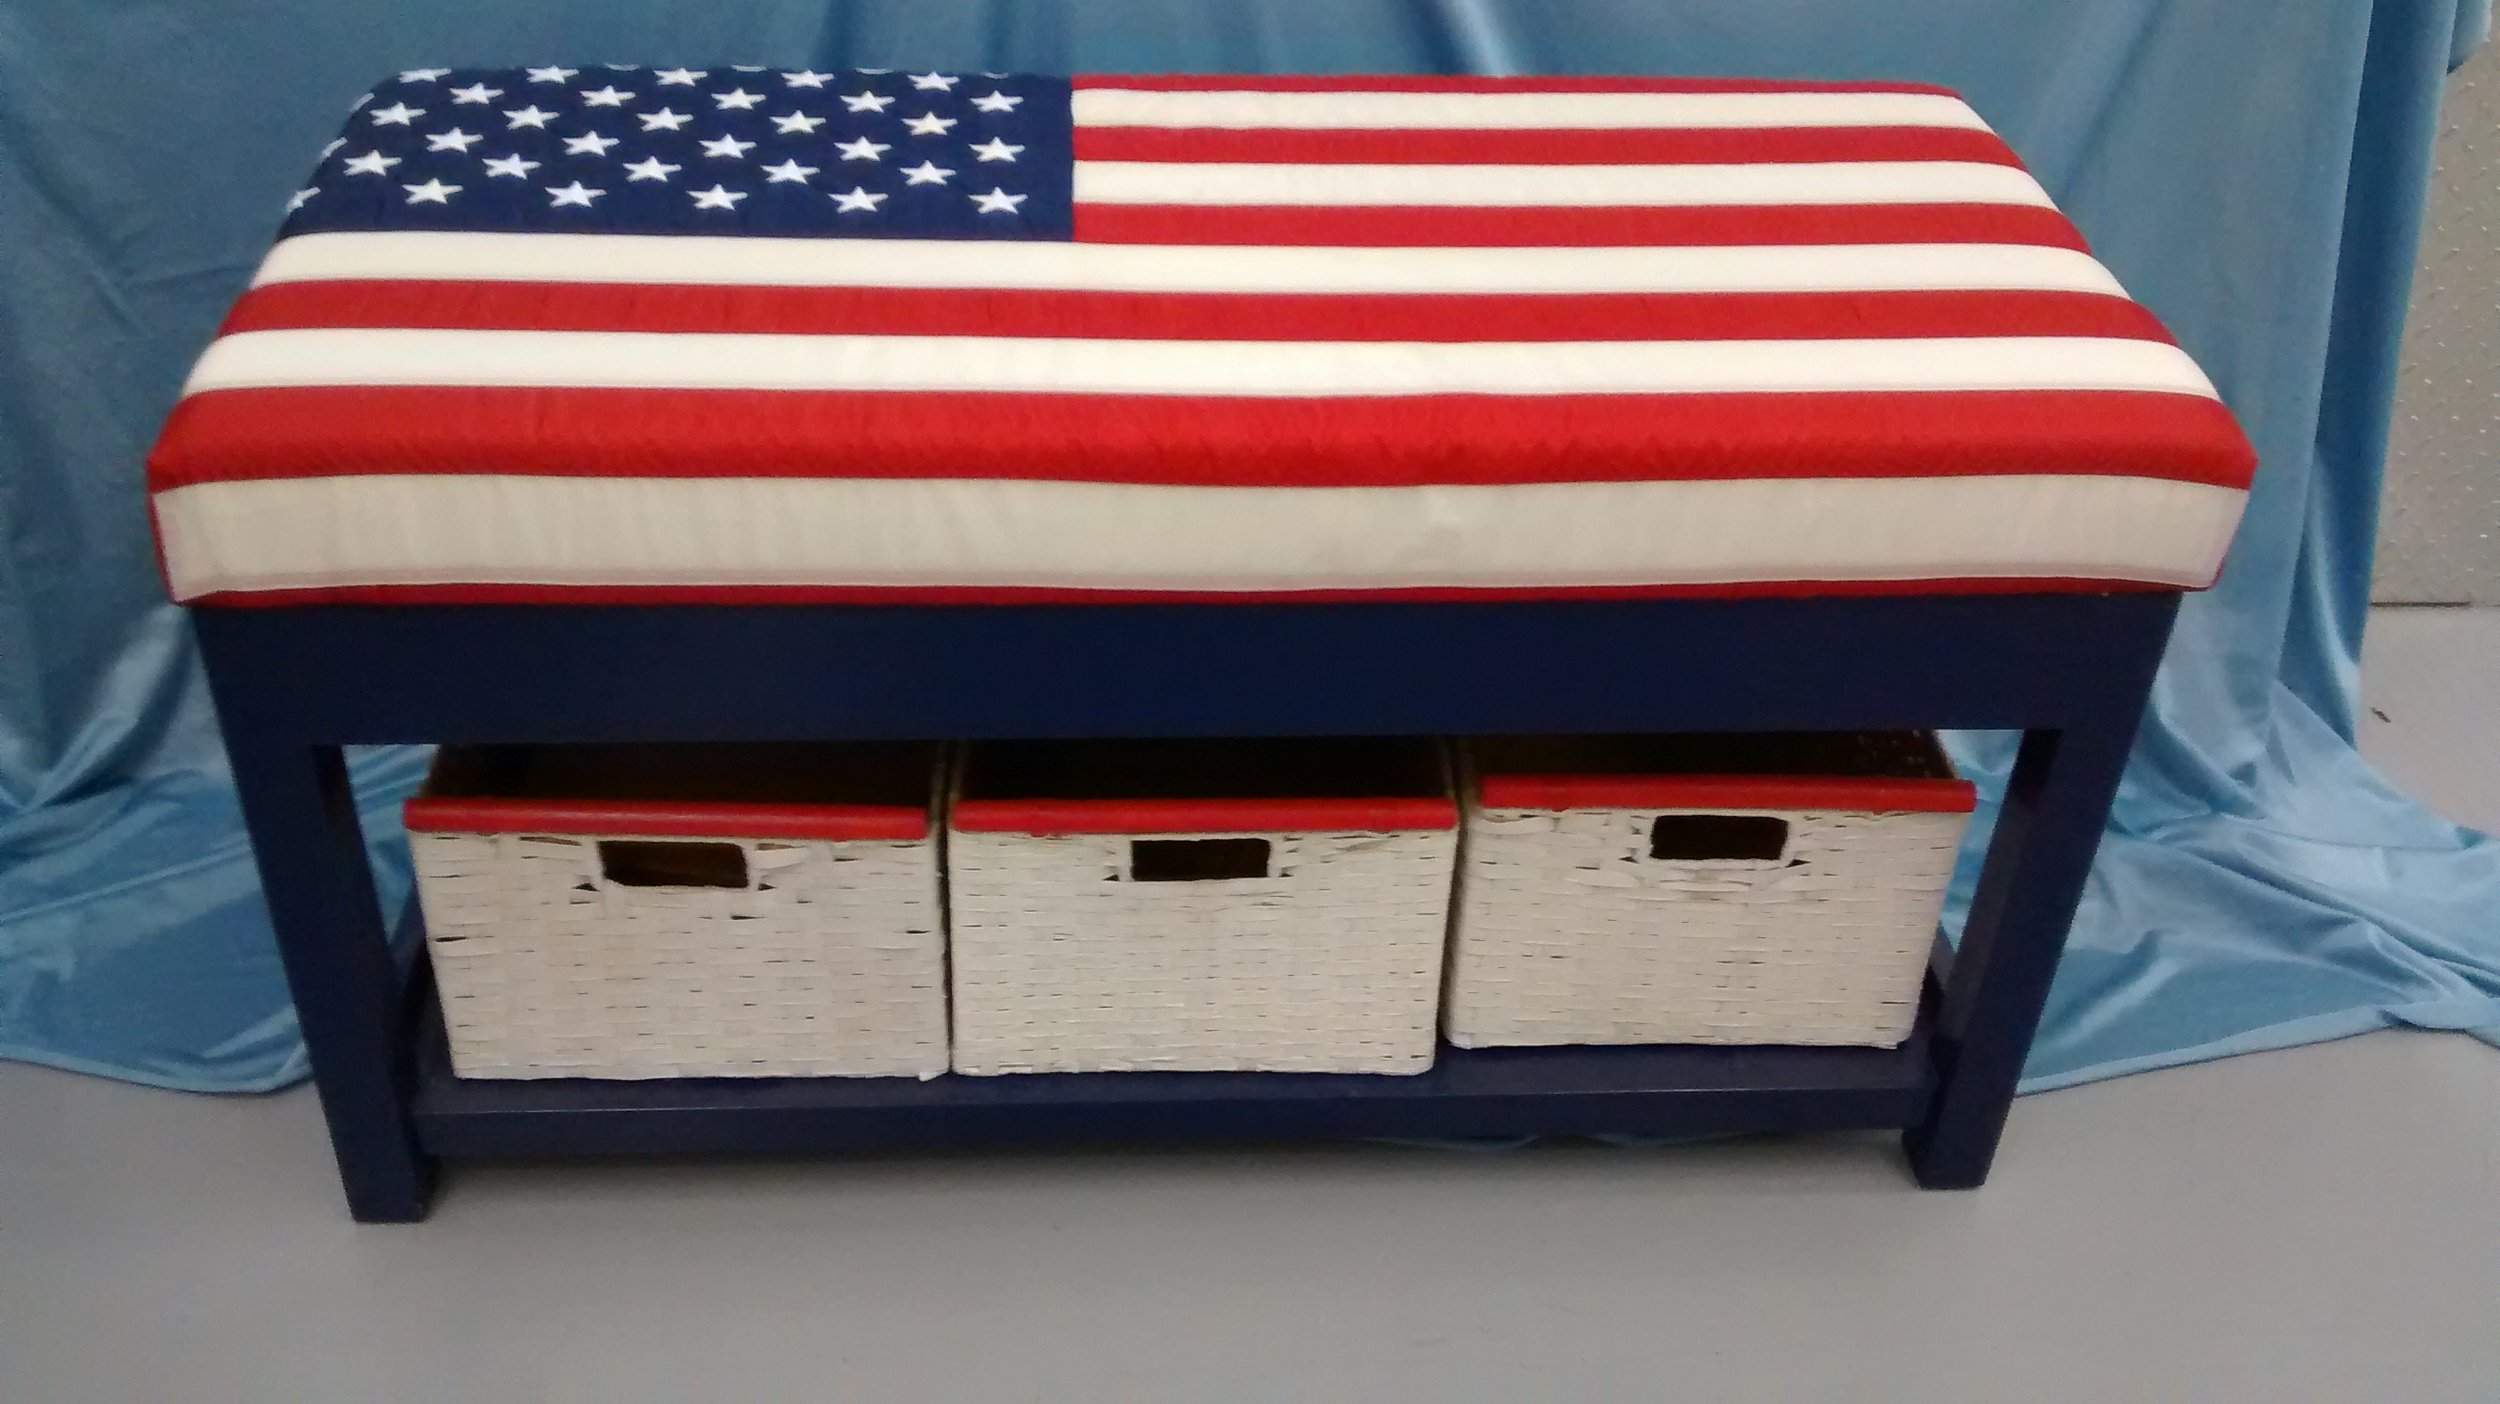 Patriotic Cushioned Bench with Shelf and Storage Baskets